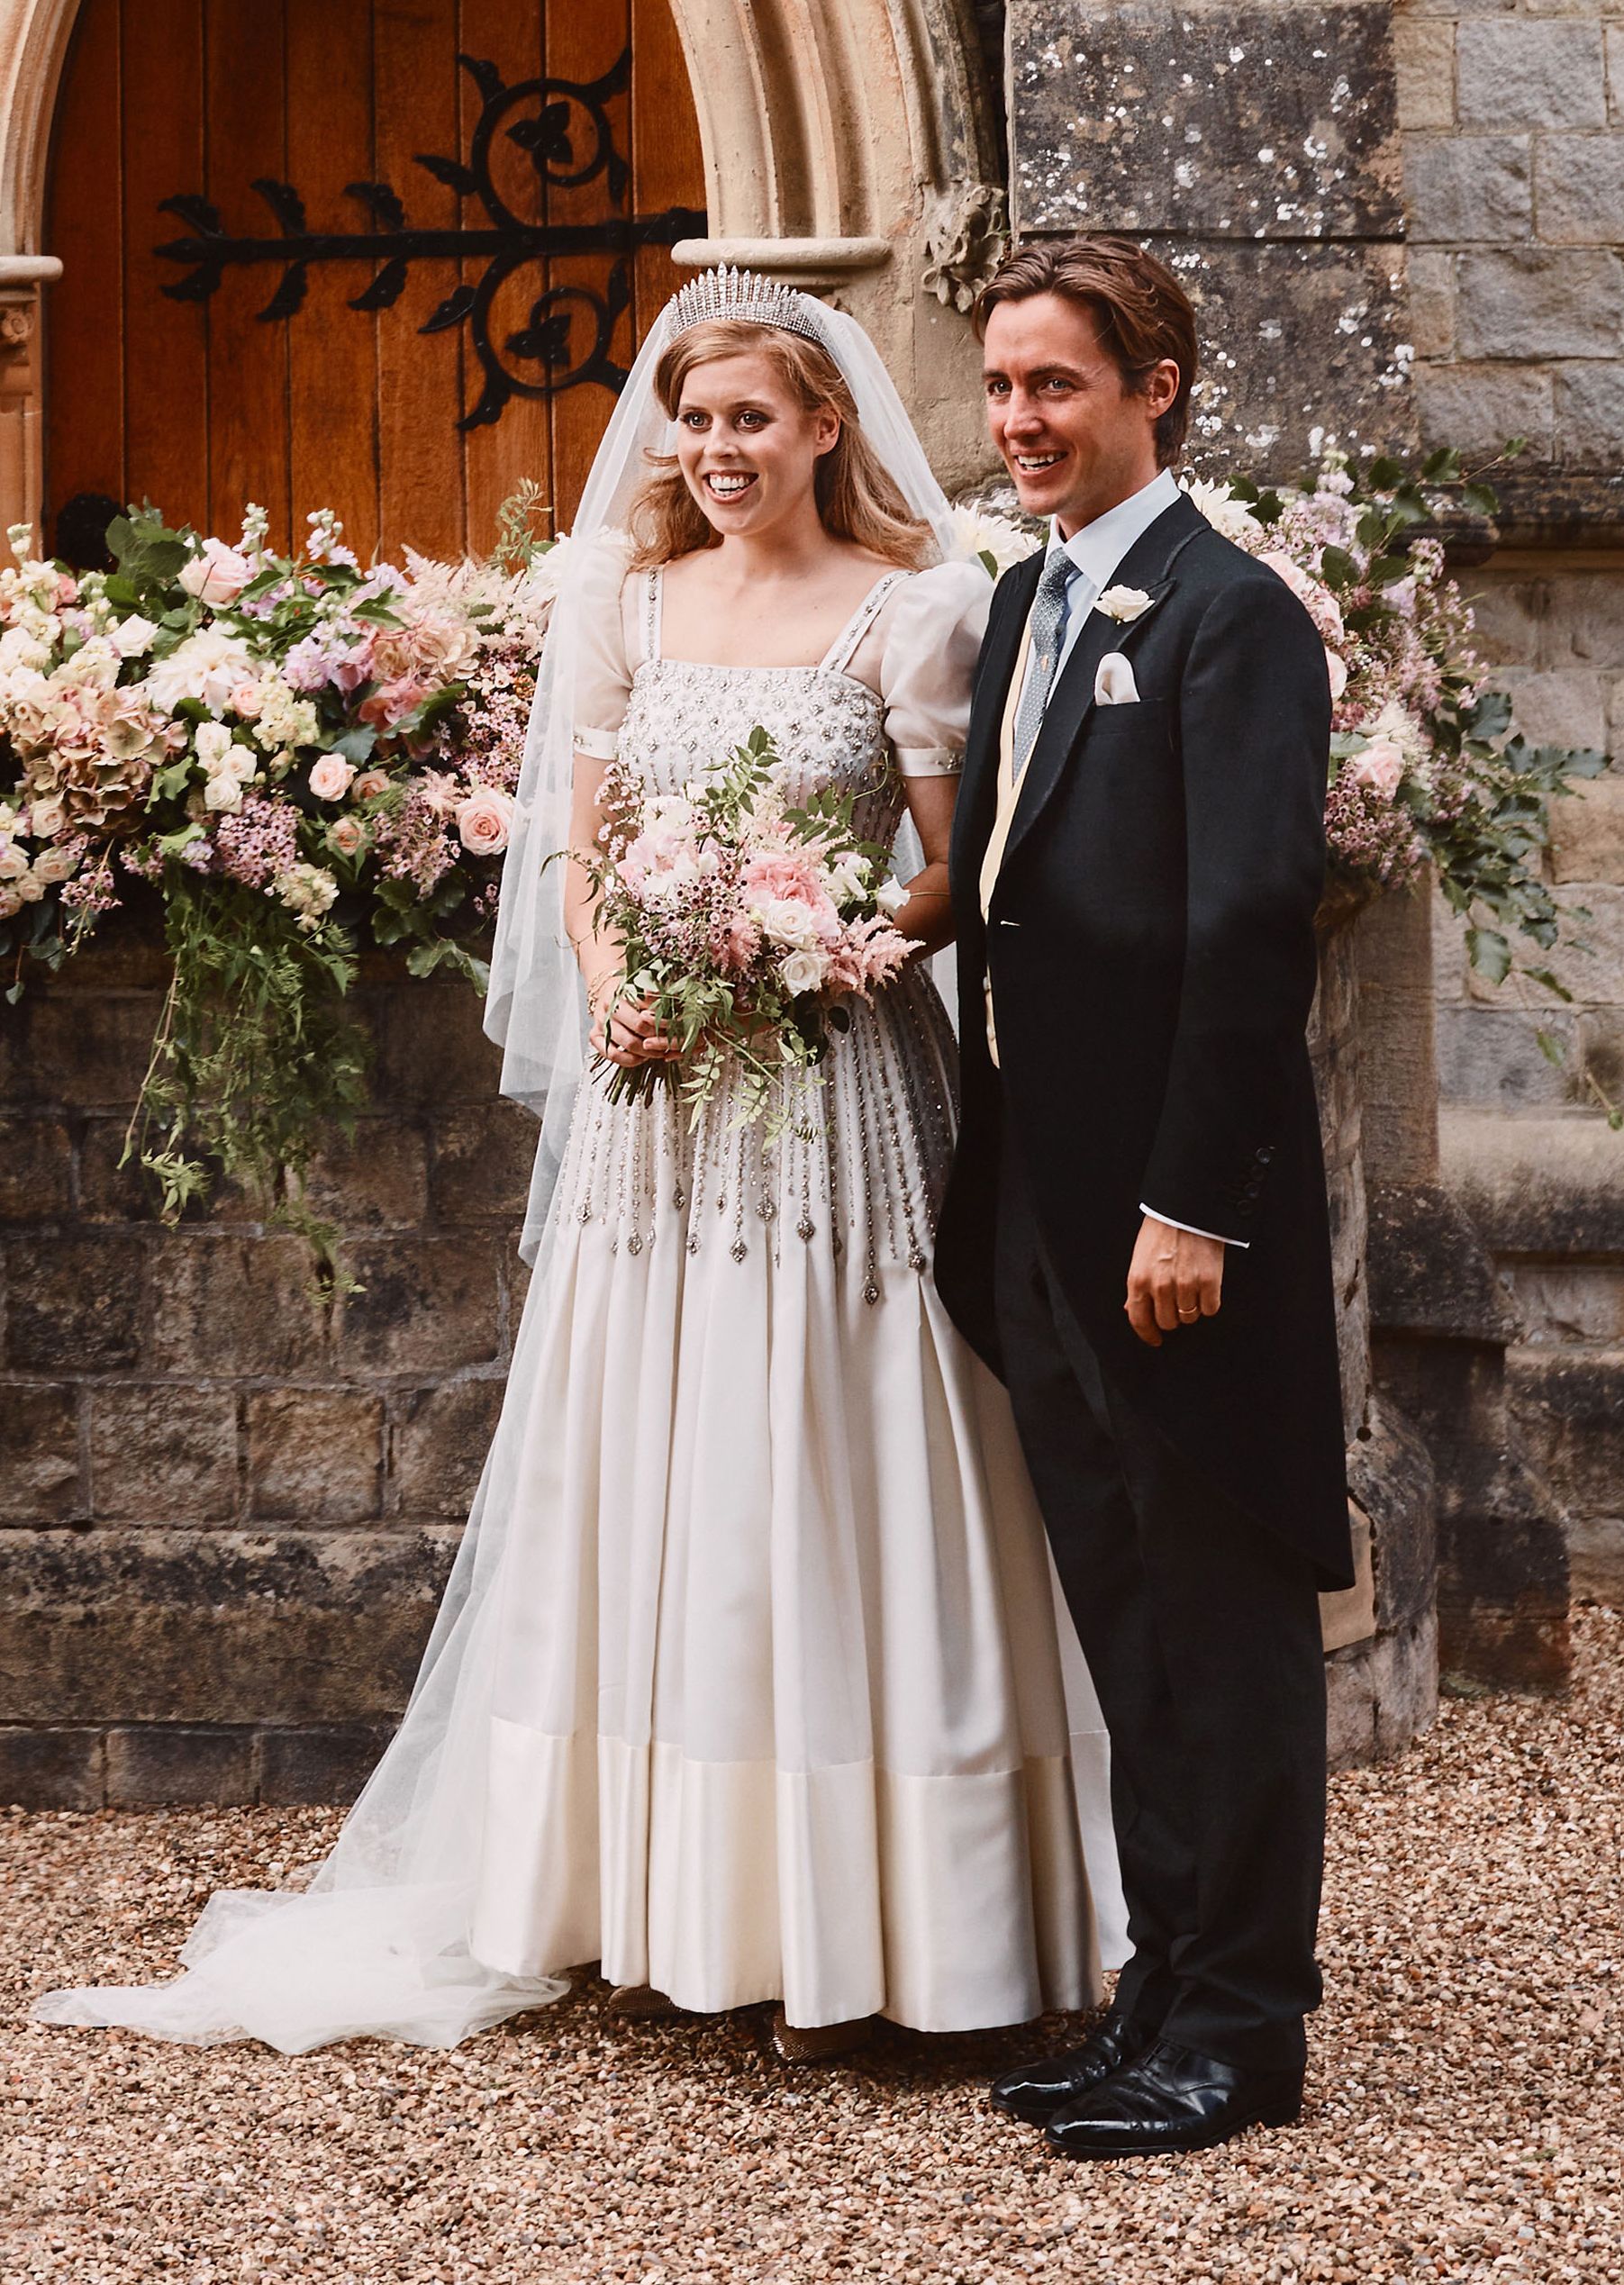 But will the Gown suit my Venue? - Thicket Priory Wedding Venue And Events